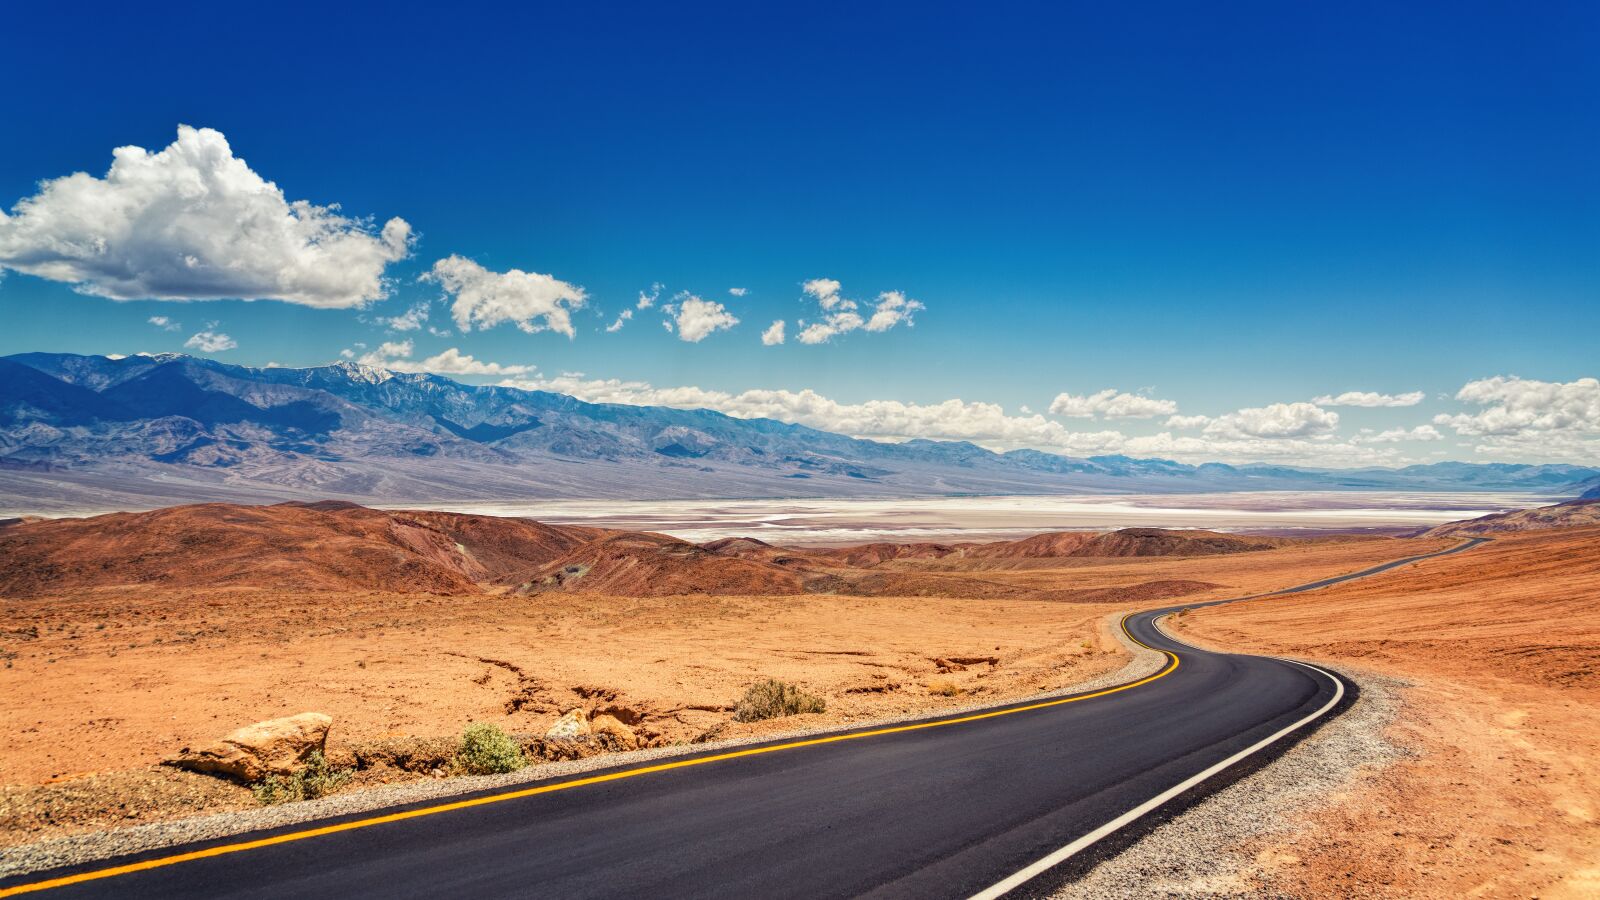 Sony a7 II sample photo. Death valley, road, landscape photography